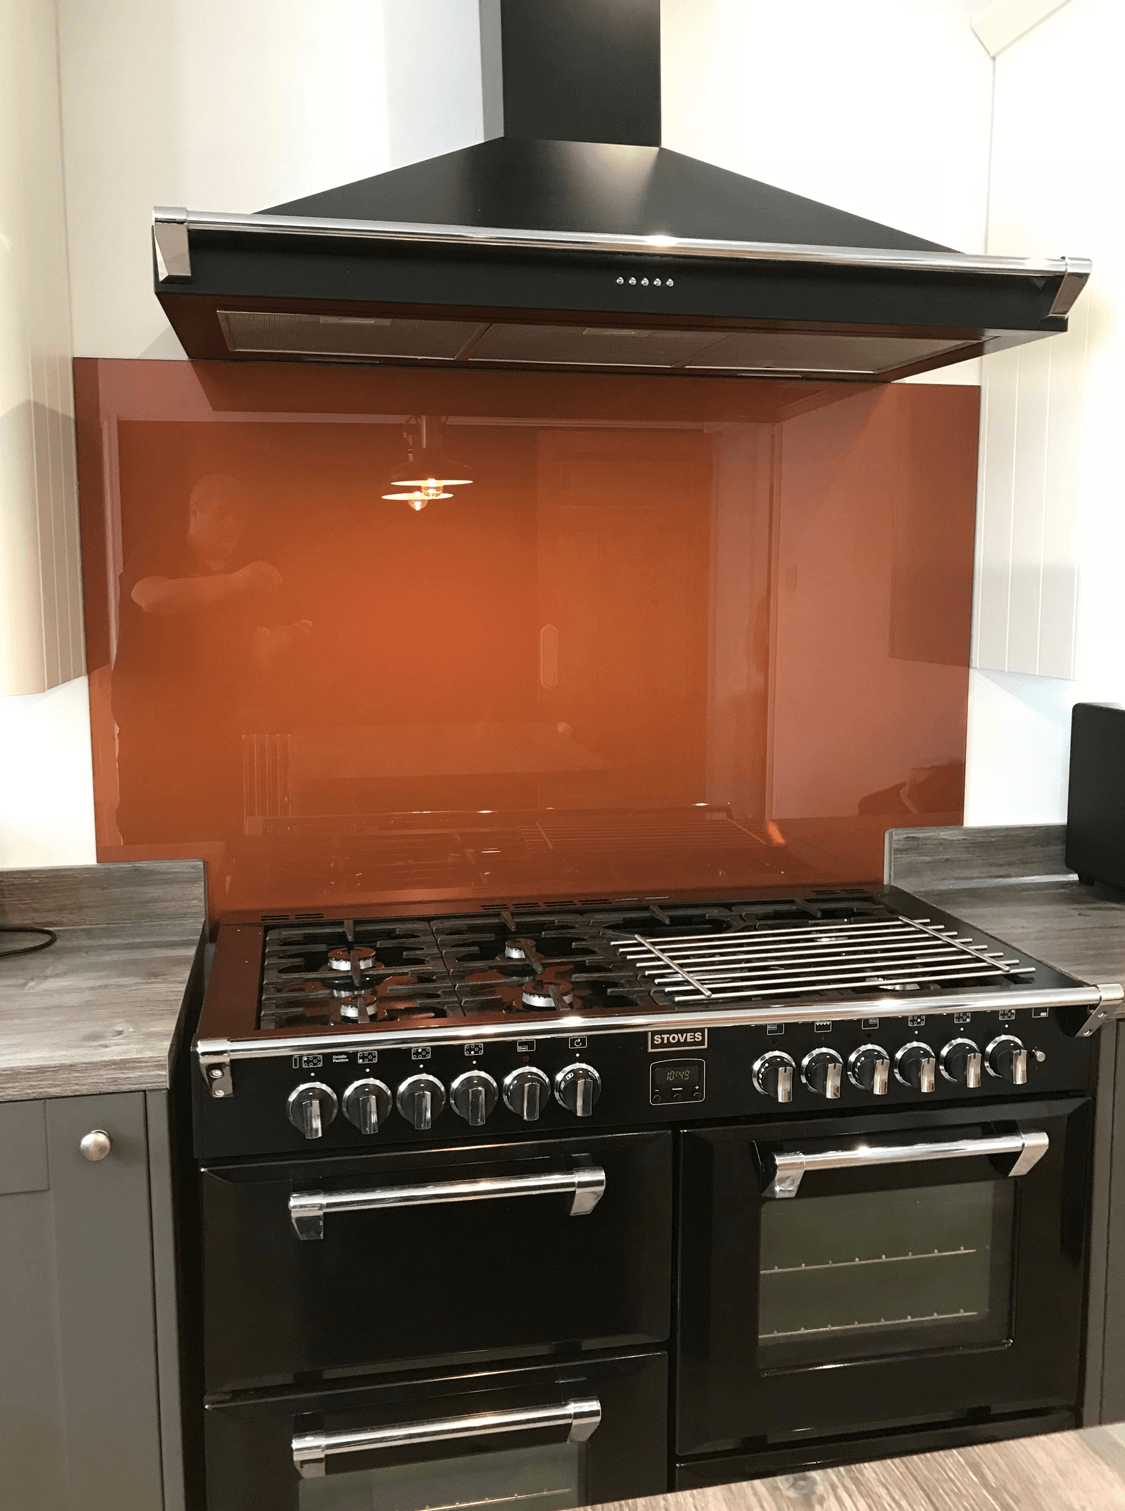 Glass Splashbacks Aged Copper and Accessories Made By Premier Range